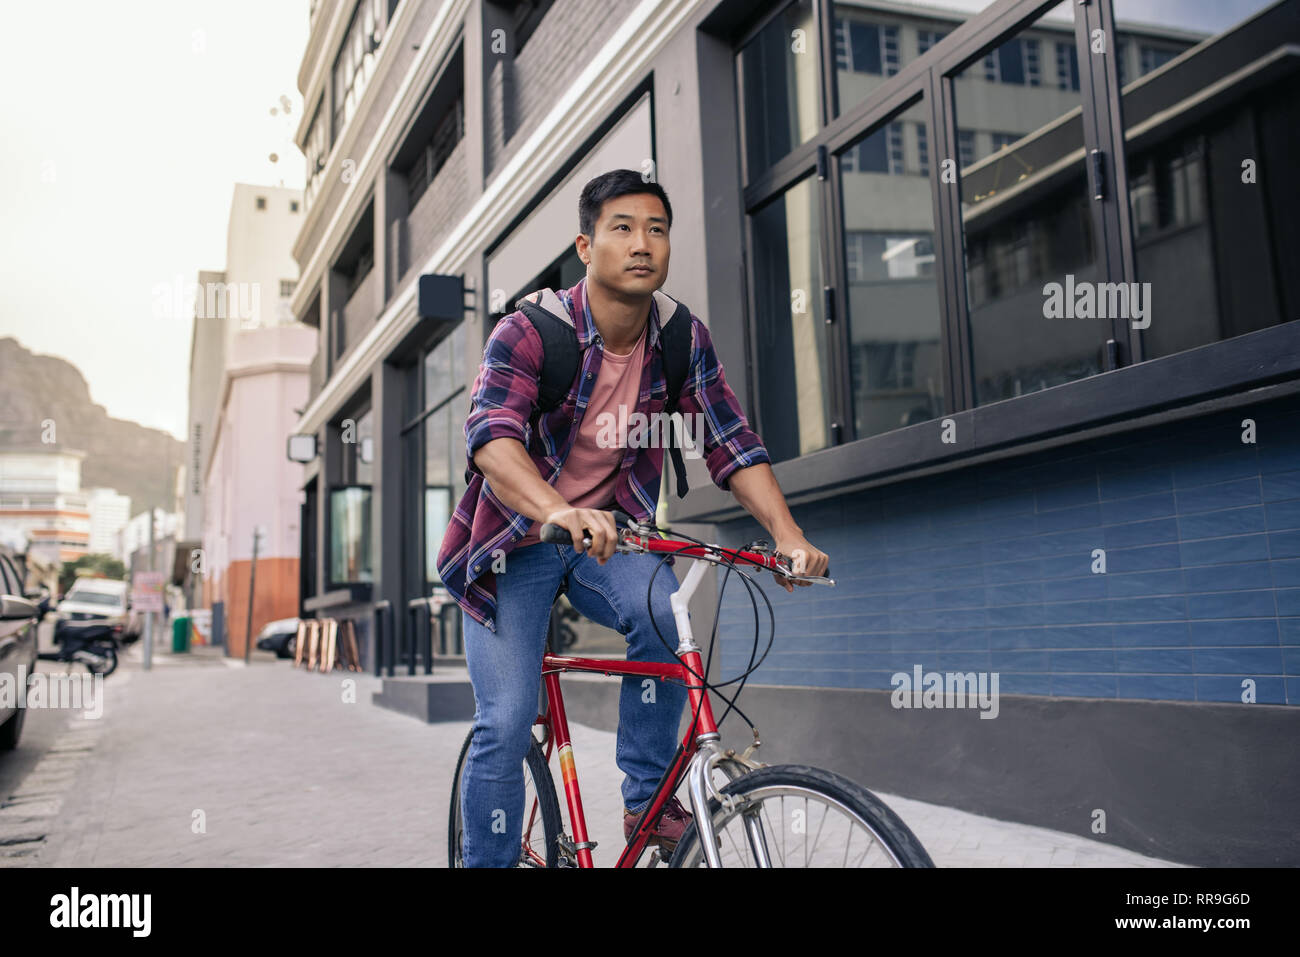 Young man riding his bicycle on a city sidewalk Stock Photo